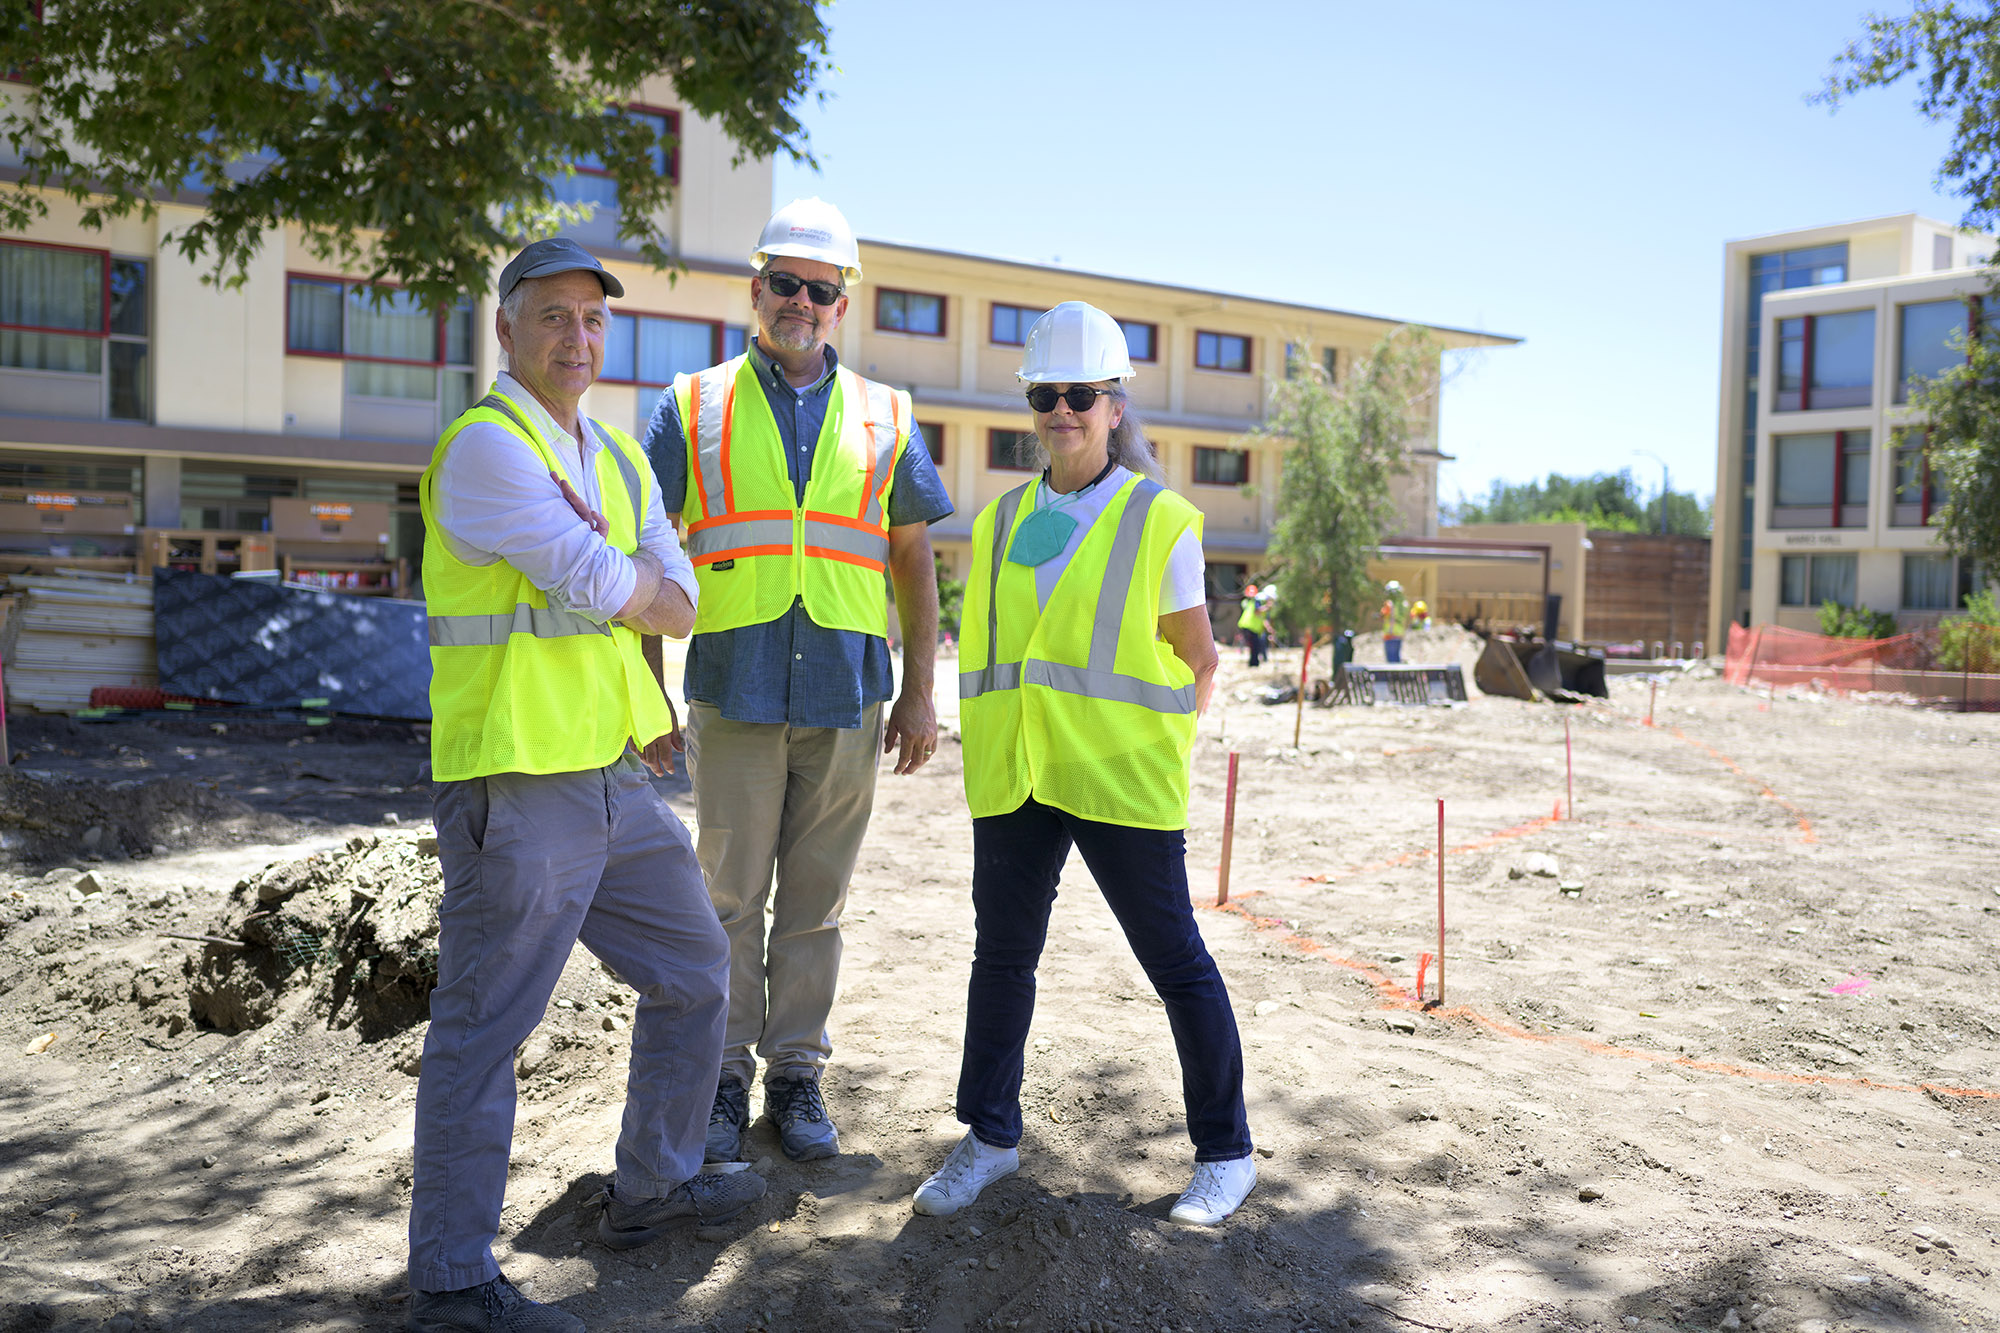 Architect and lighting principals stand on the open construction site on Mid-Quad with the artist Pae White, wearing safety vests and hard hats.